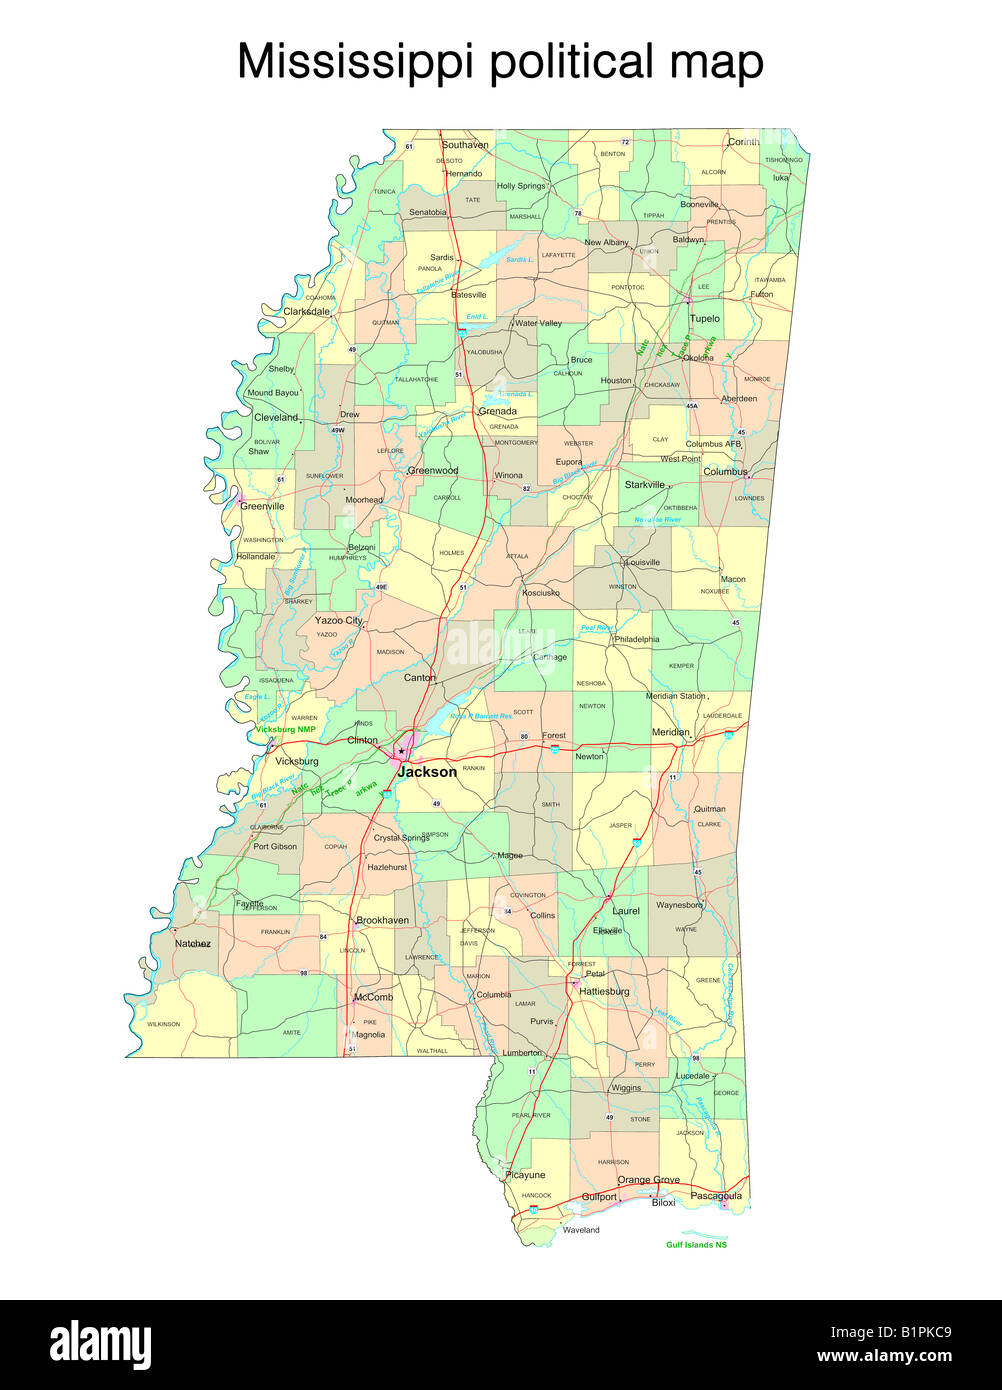 Mississippi state political map Stock Photo